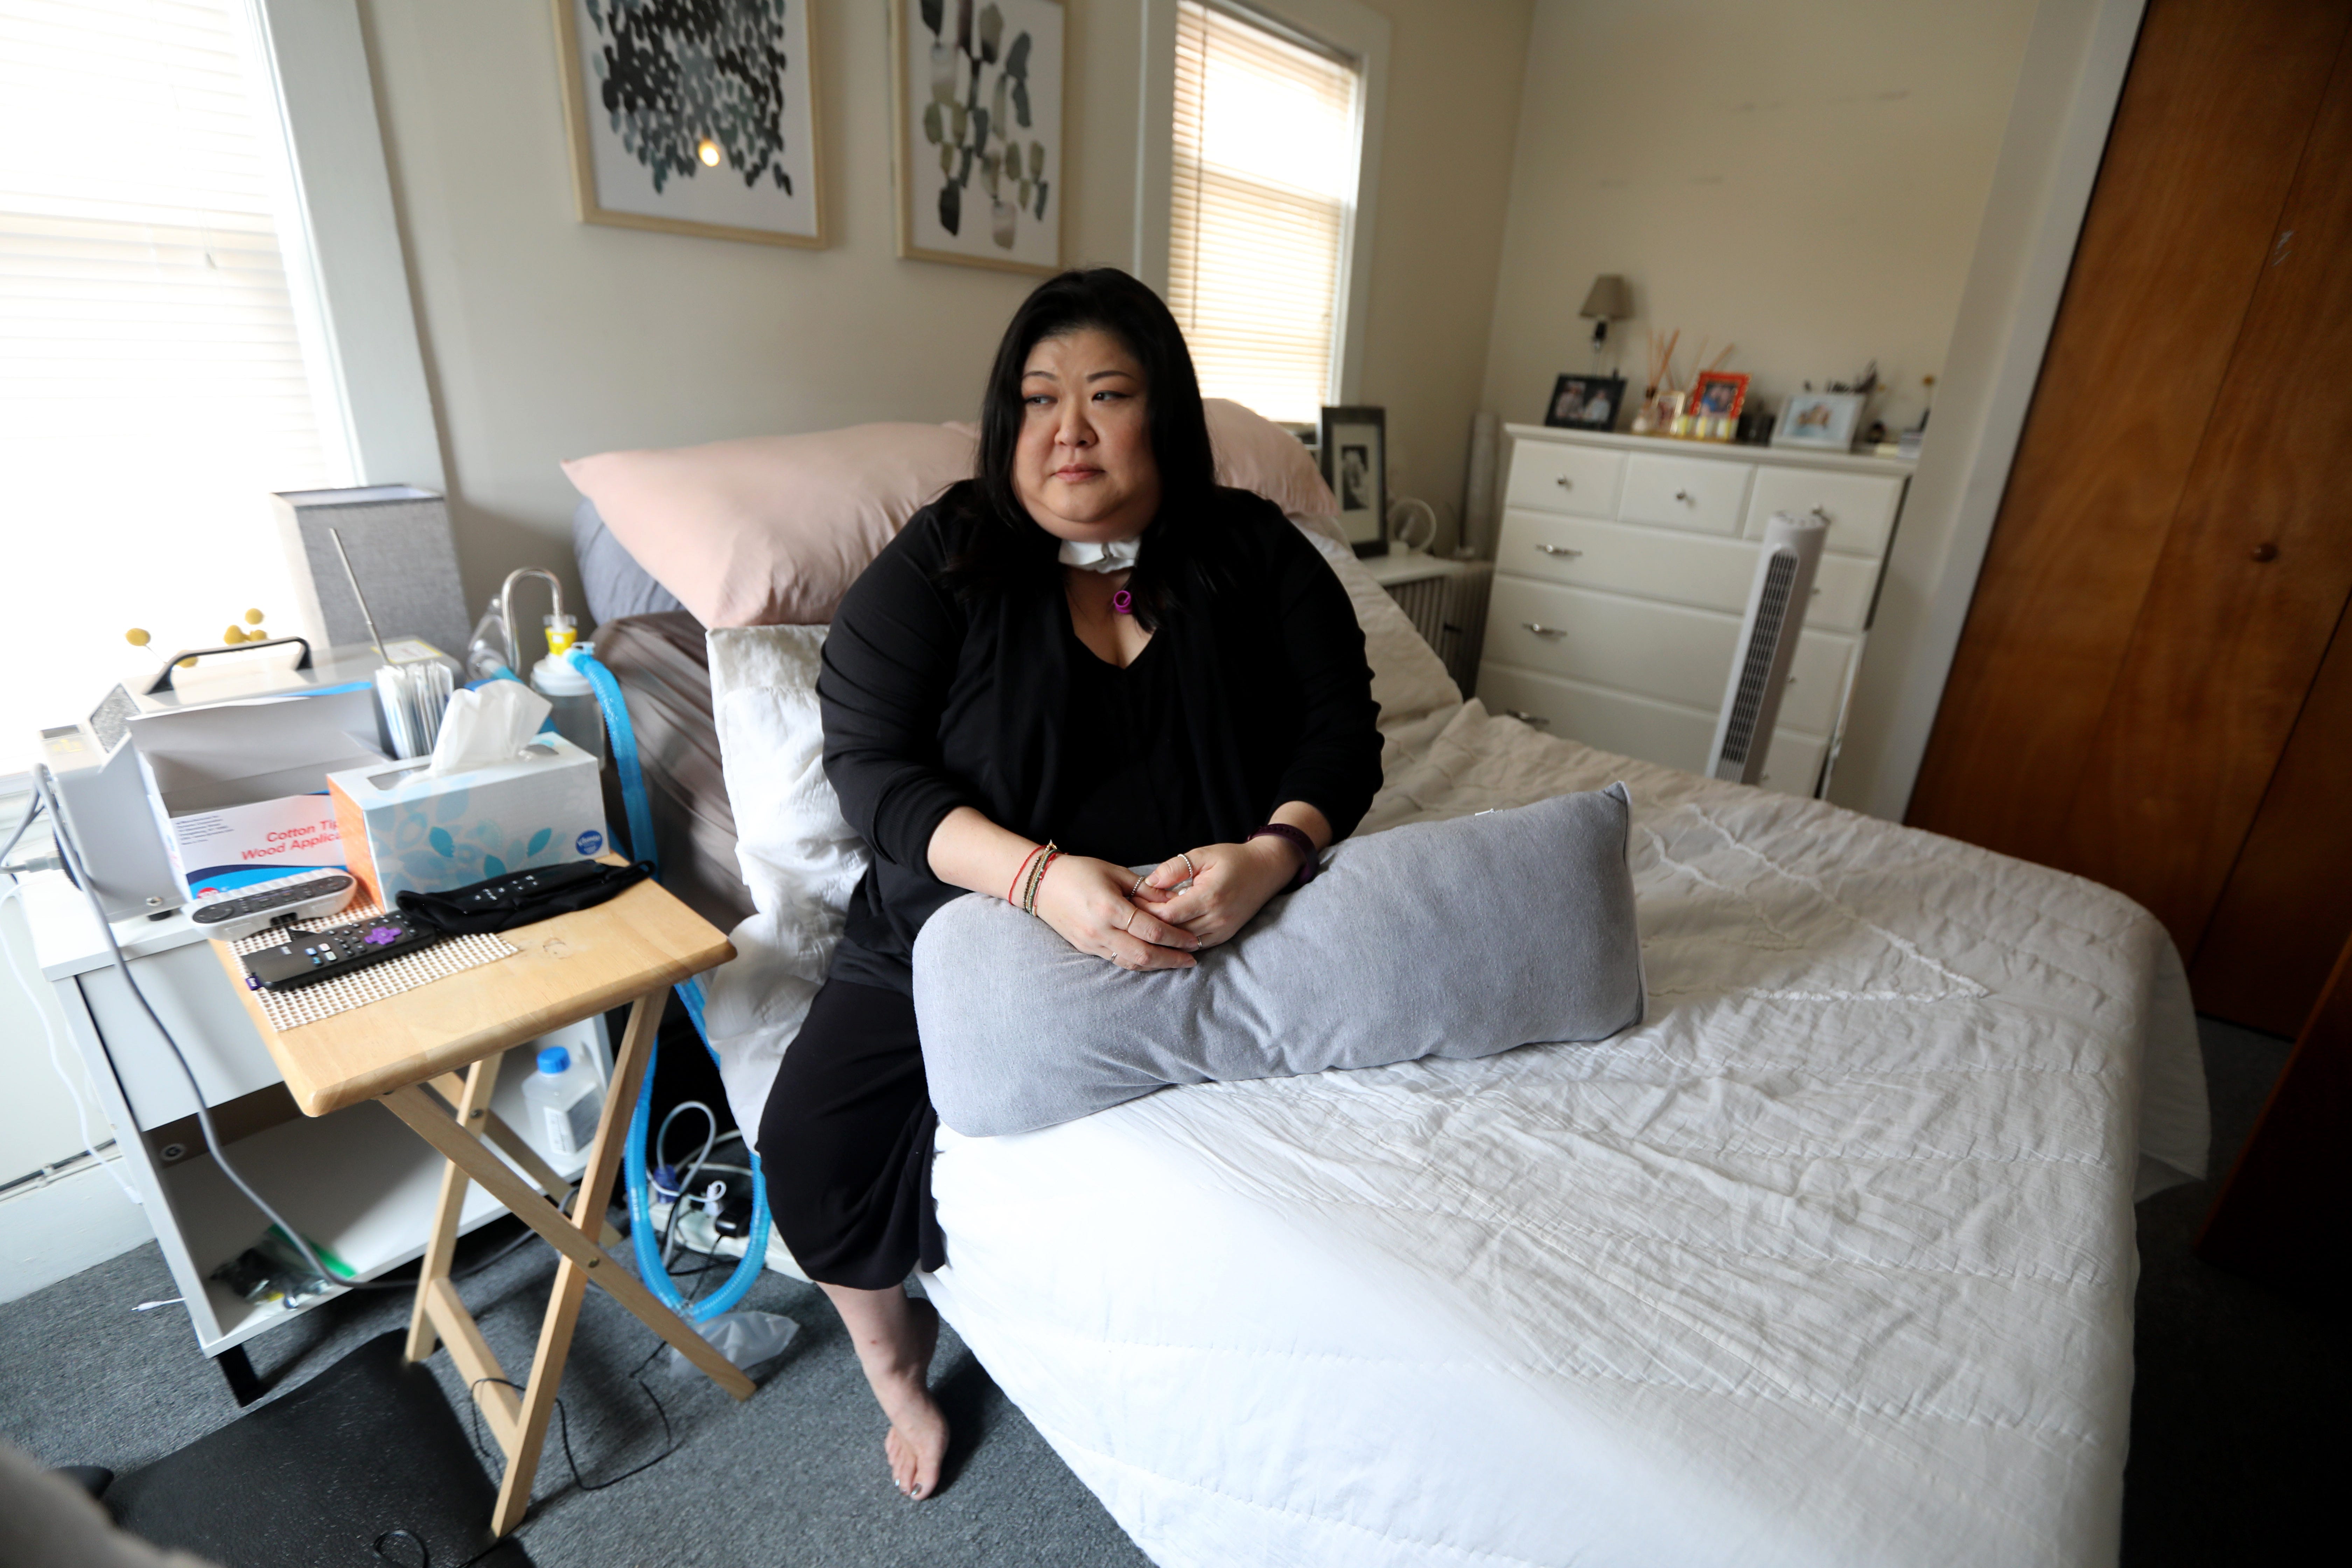 Lucy Kong, an accountant in Queens, ended up in a coma and on a ventilator last spring after contracting COVID-19. About two months after she woke up in mid-April 2020, she joined the flood of pandemic-related layoffs.